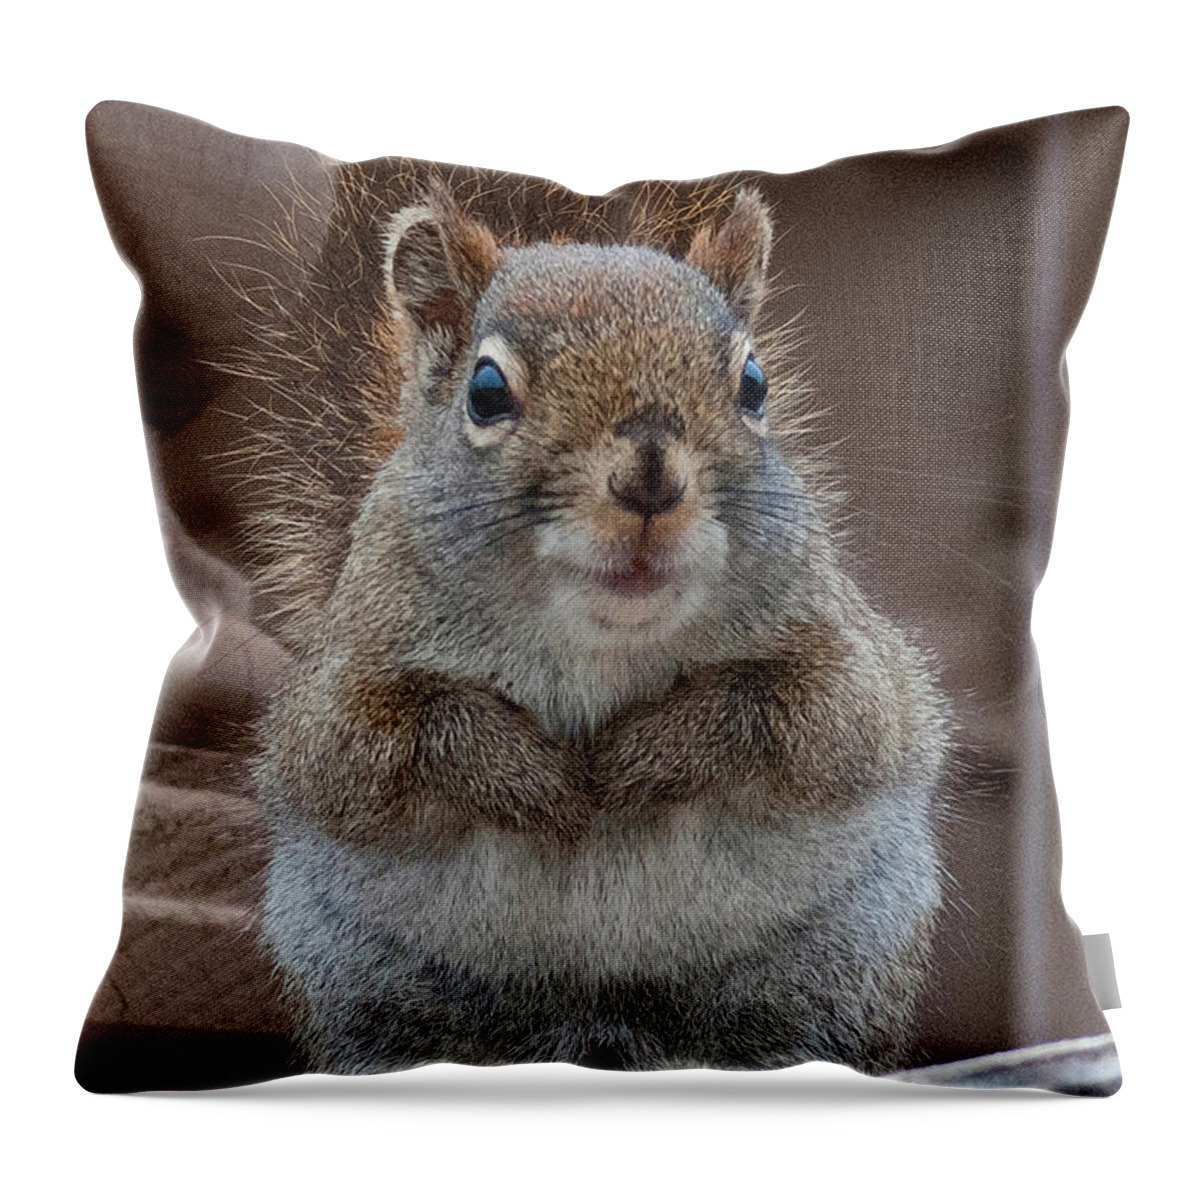 Squirrel Throw Pillow featuring the photograph Scroodle by WB Johnston